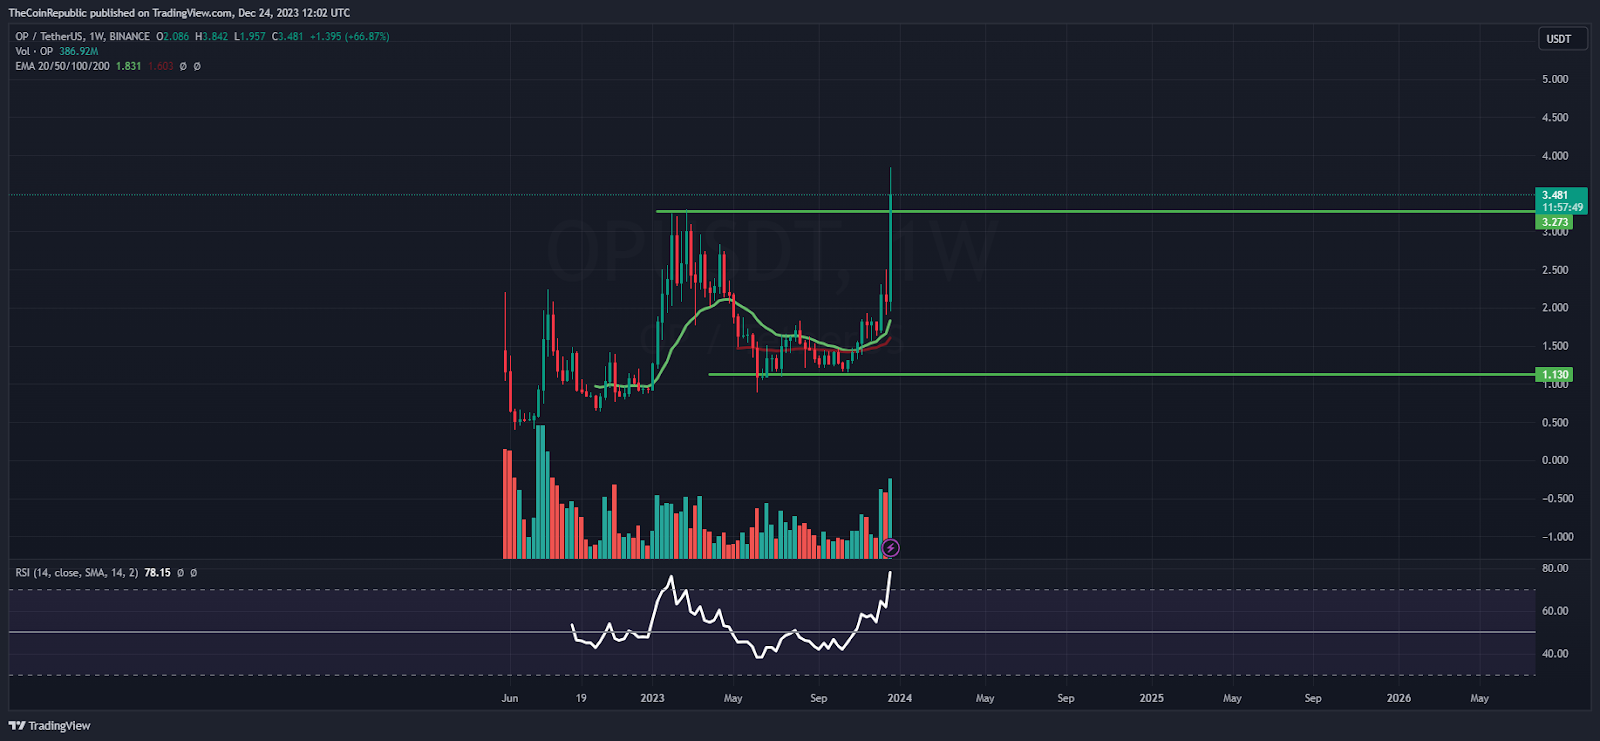 OP Price Prediction: Optimism Shines Above $3 Noted Breakout